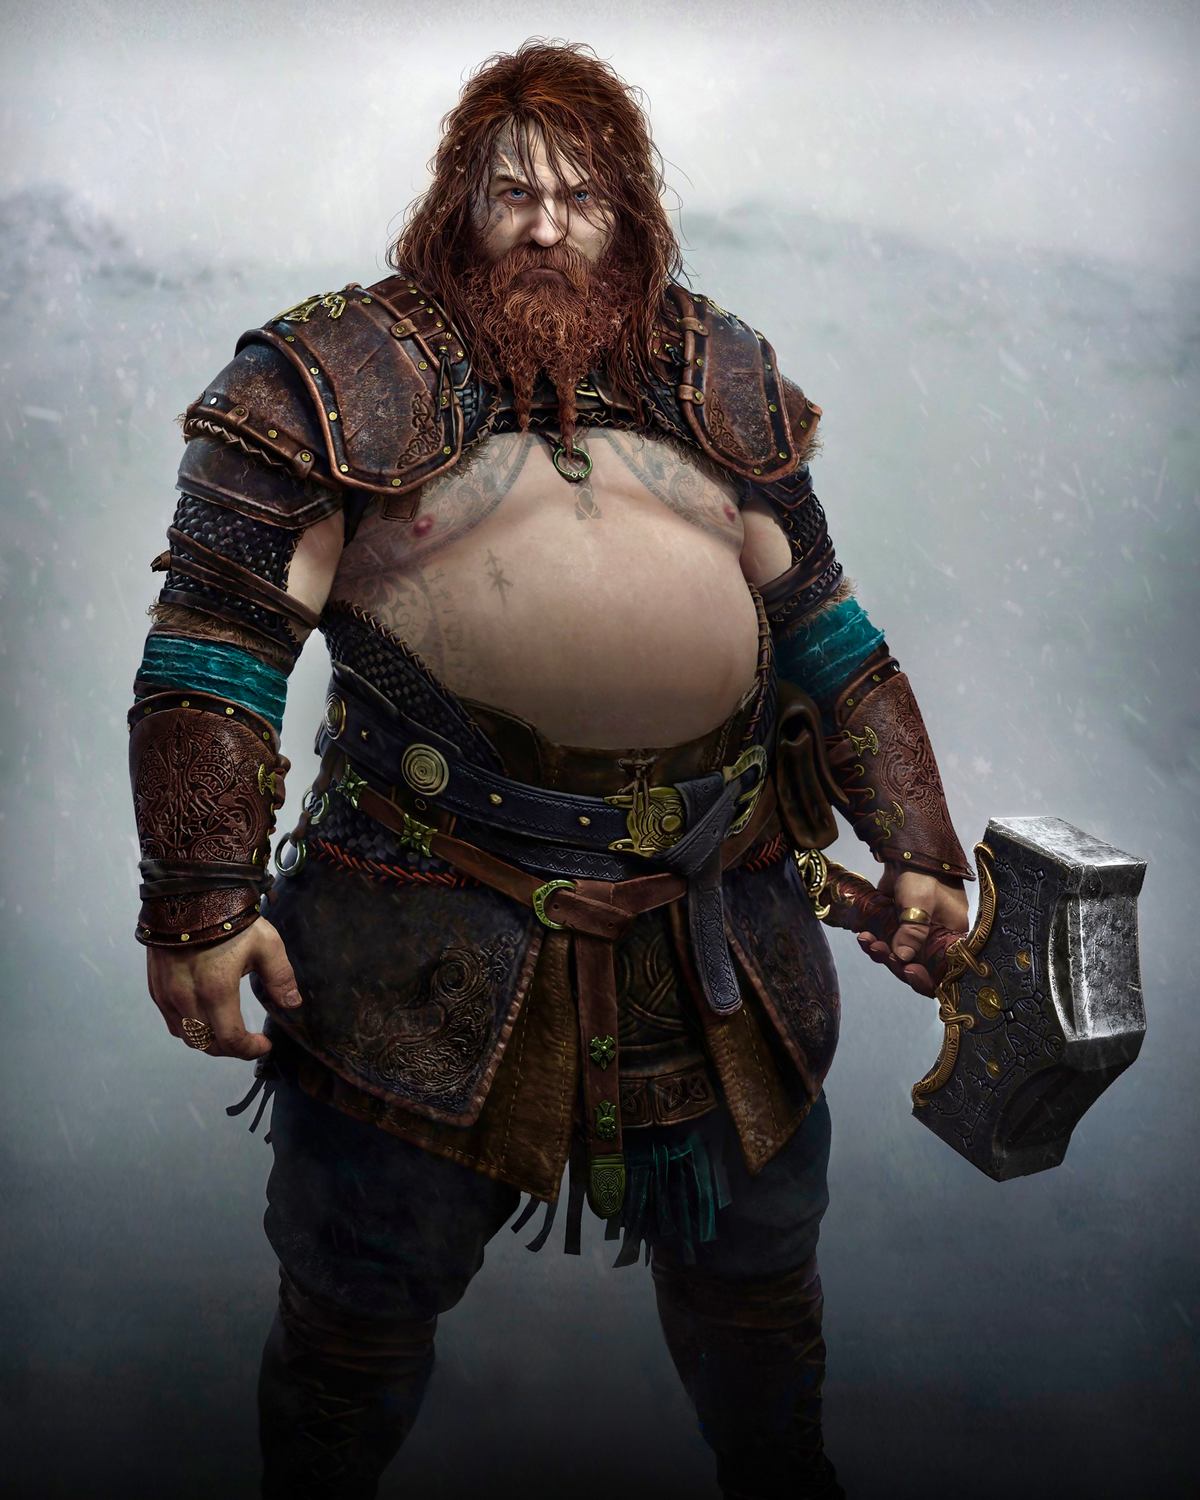 The Quest for Týr, God of War Wiki